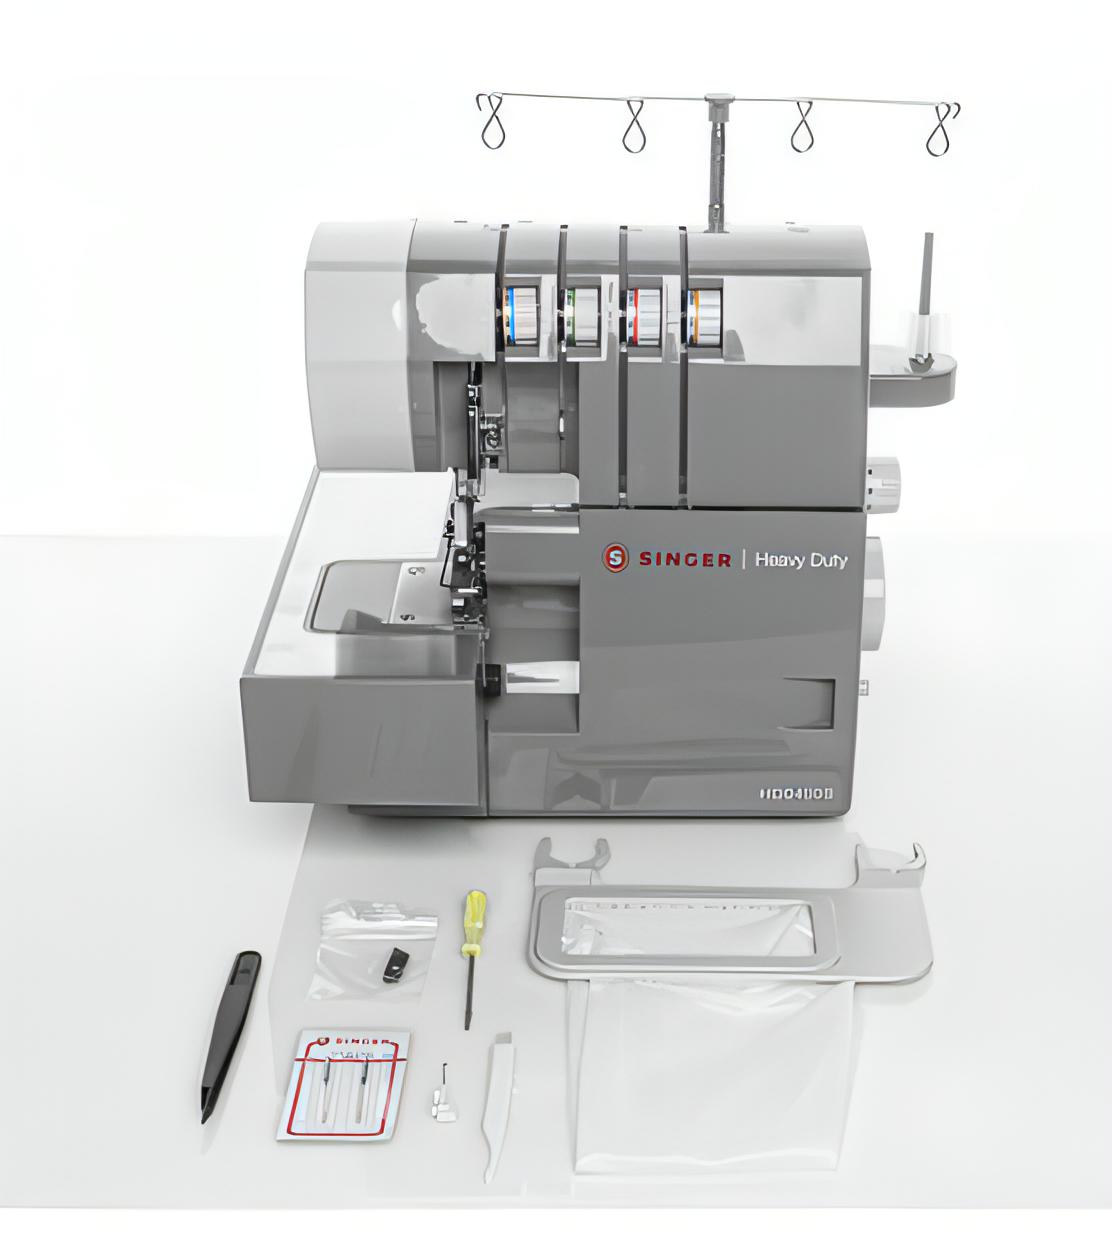 Singer HD0405S Heavy Duty Overlocker 2/3/4 thread overlocker. 1300 stitches per minute with colour coded user friendly threading and enhanced lighting